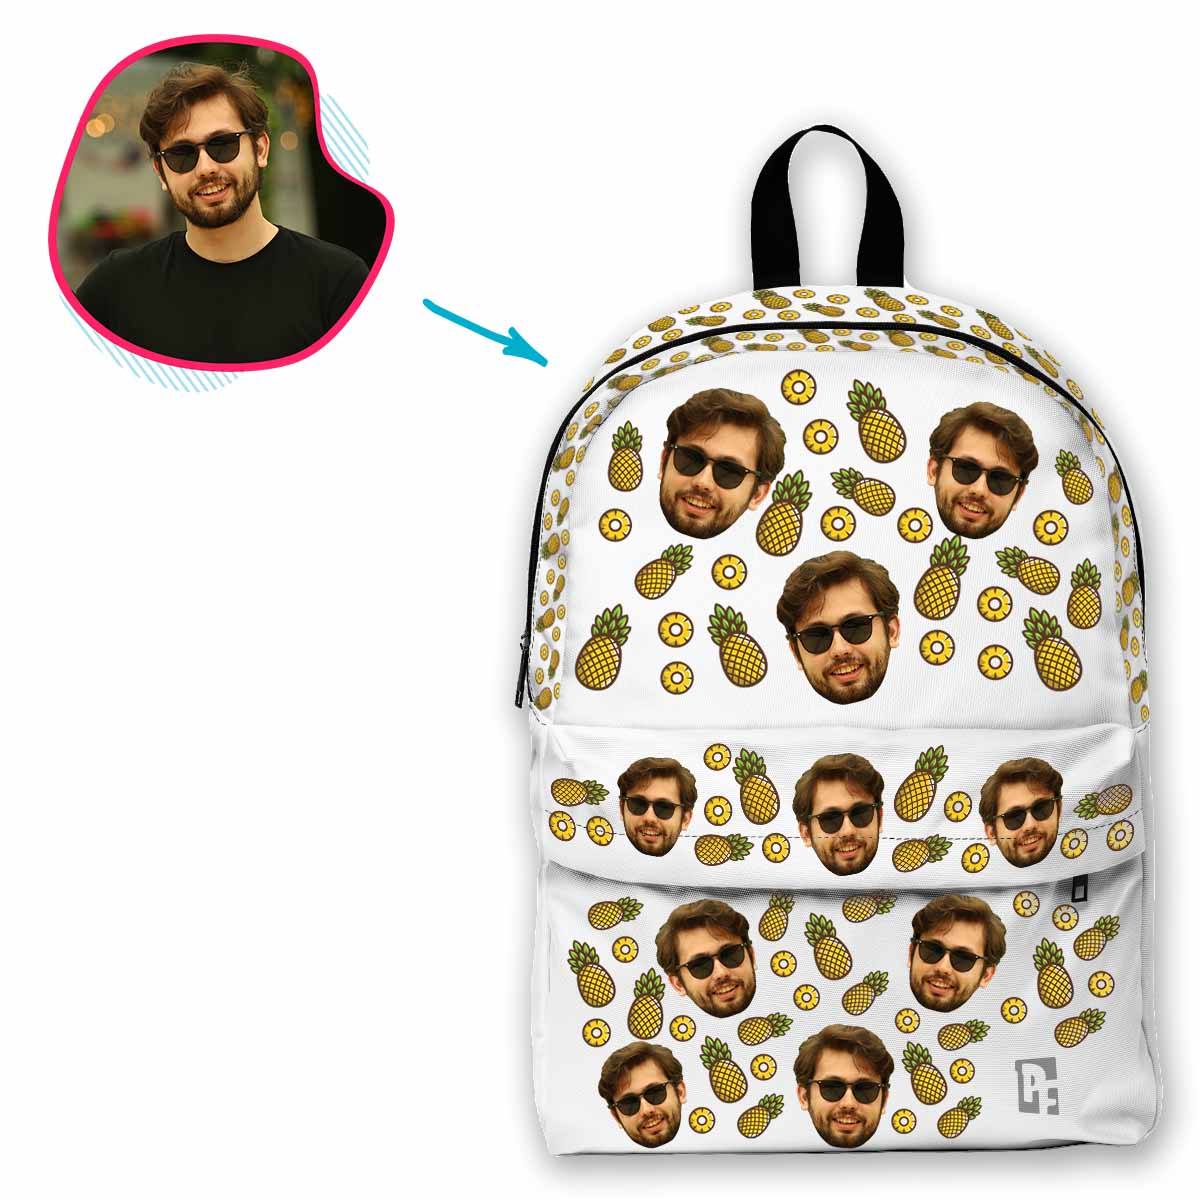 white Fruits classic backpack personalized with photo of face printed on it